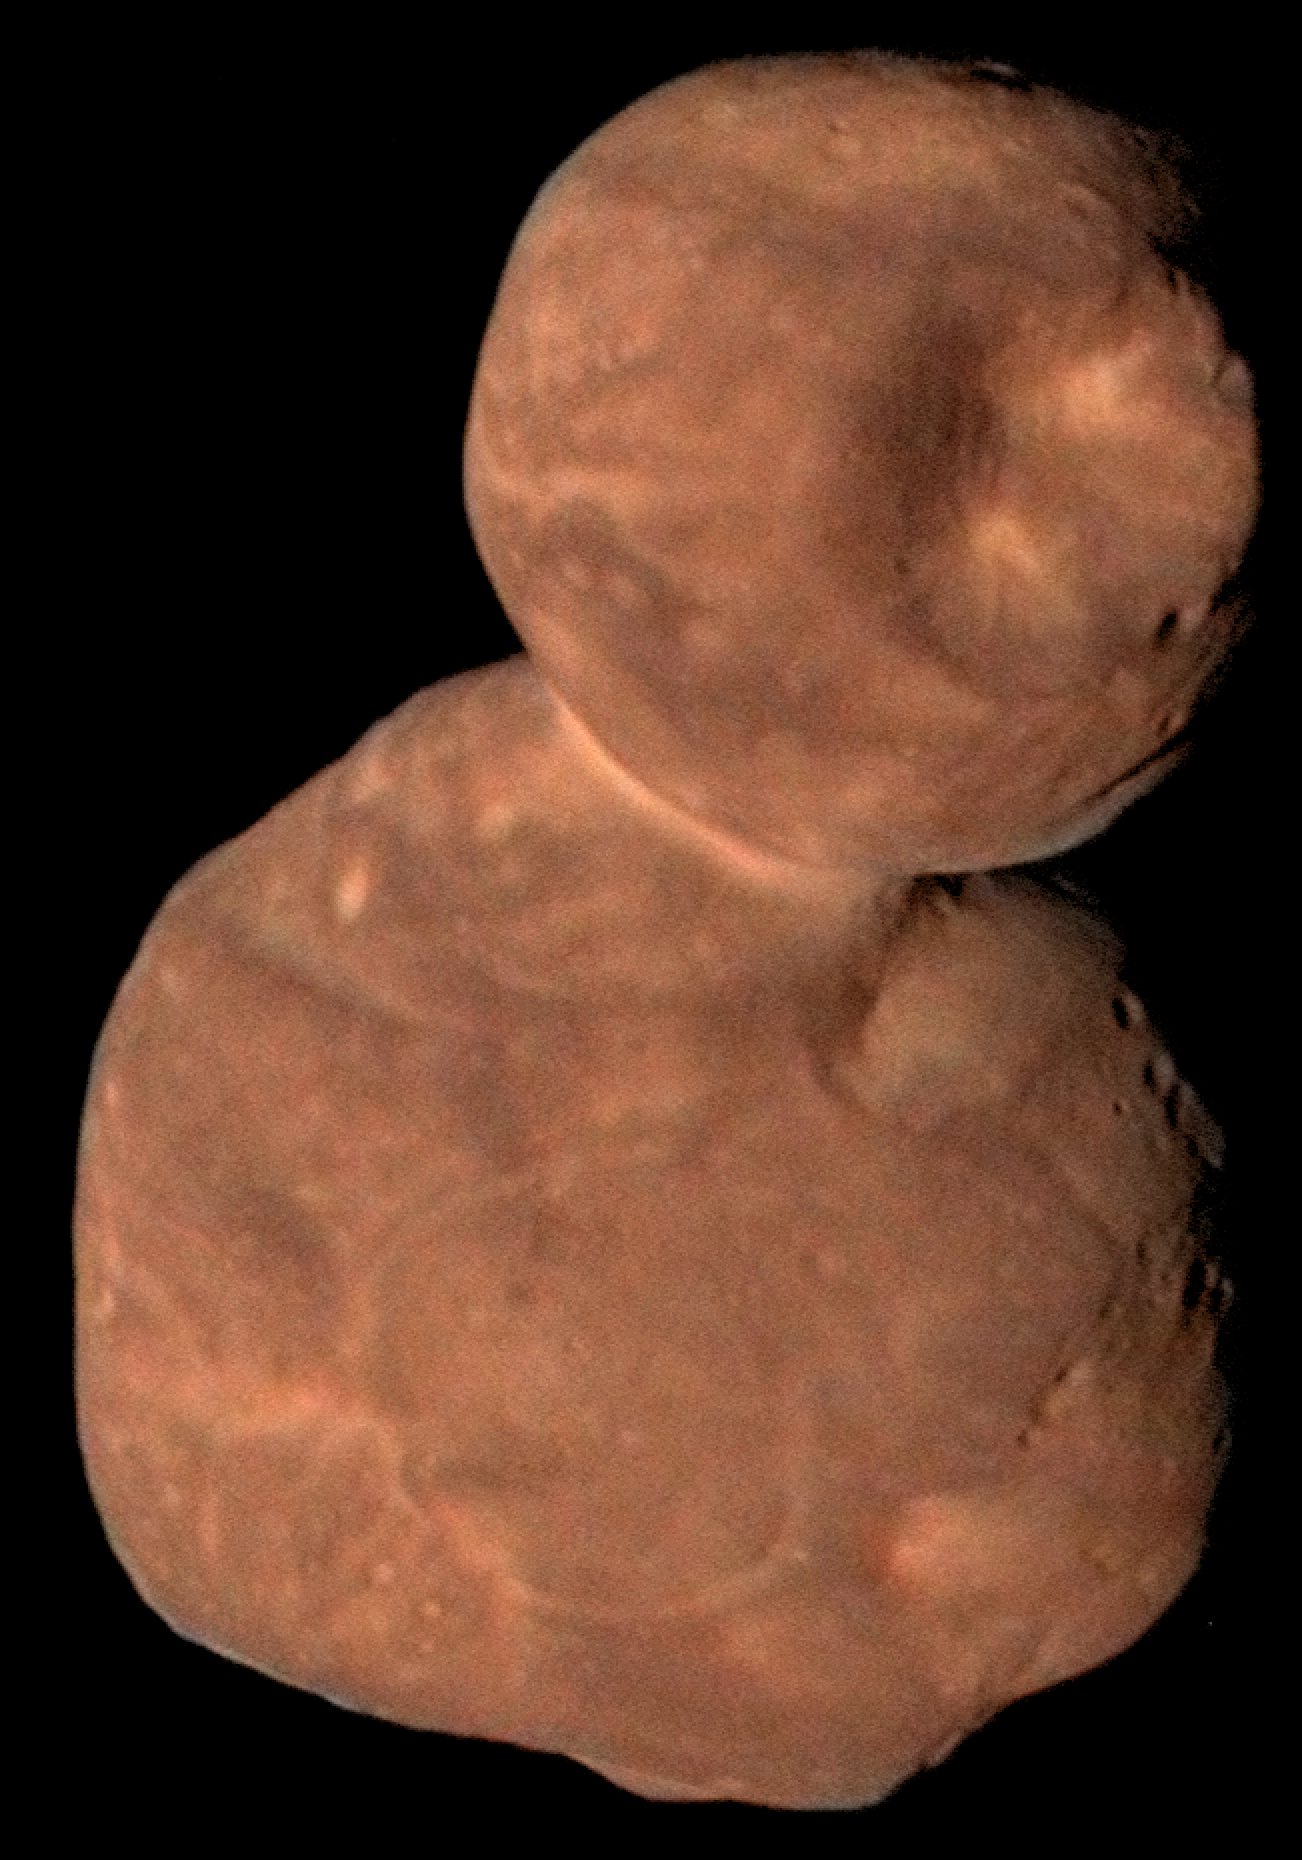 Composite image of Arrokoth (kuiper belt object 2014 MU 69) showing it's one object made from two lumps of rock like a snowman.